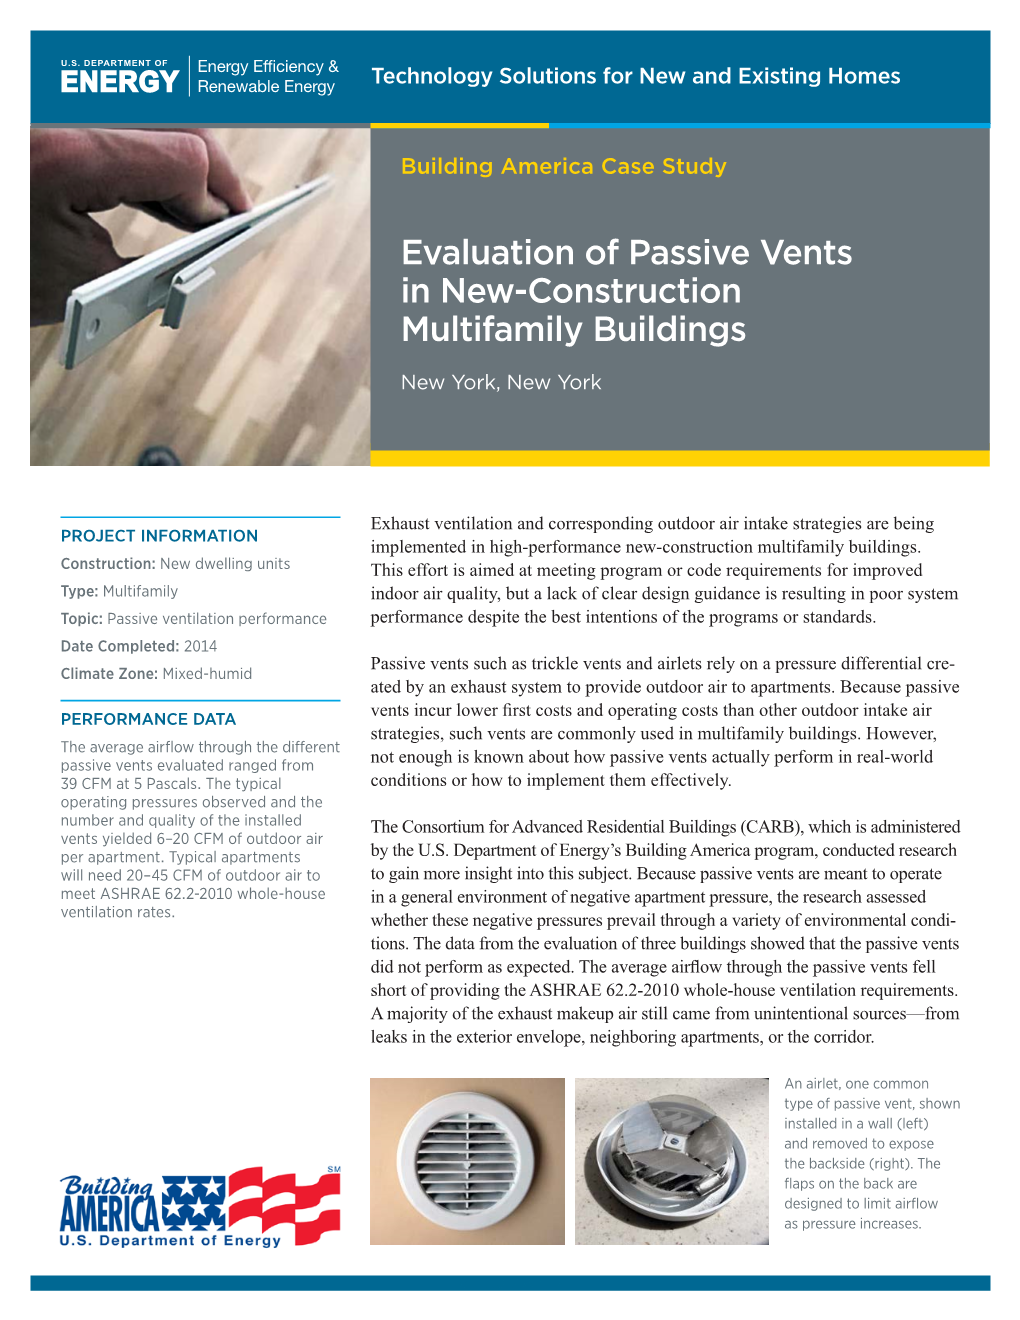 Evaluation of Passive Vents in New-Construction Multifamily Buildings